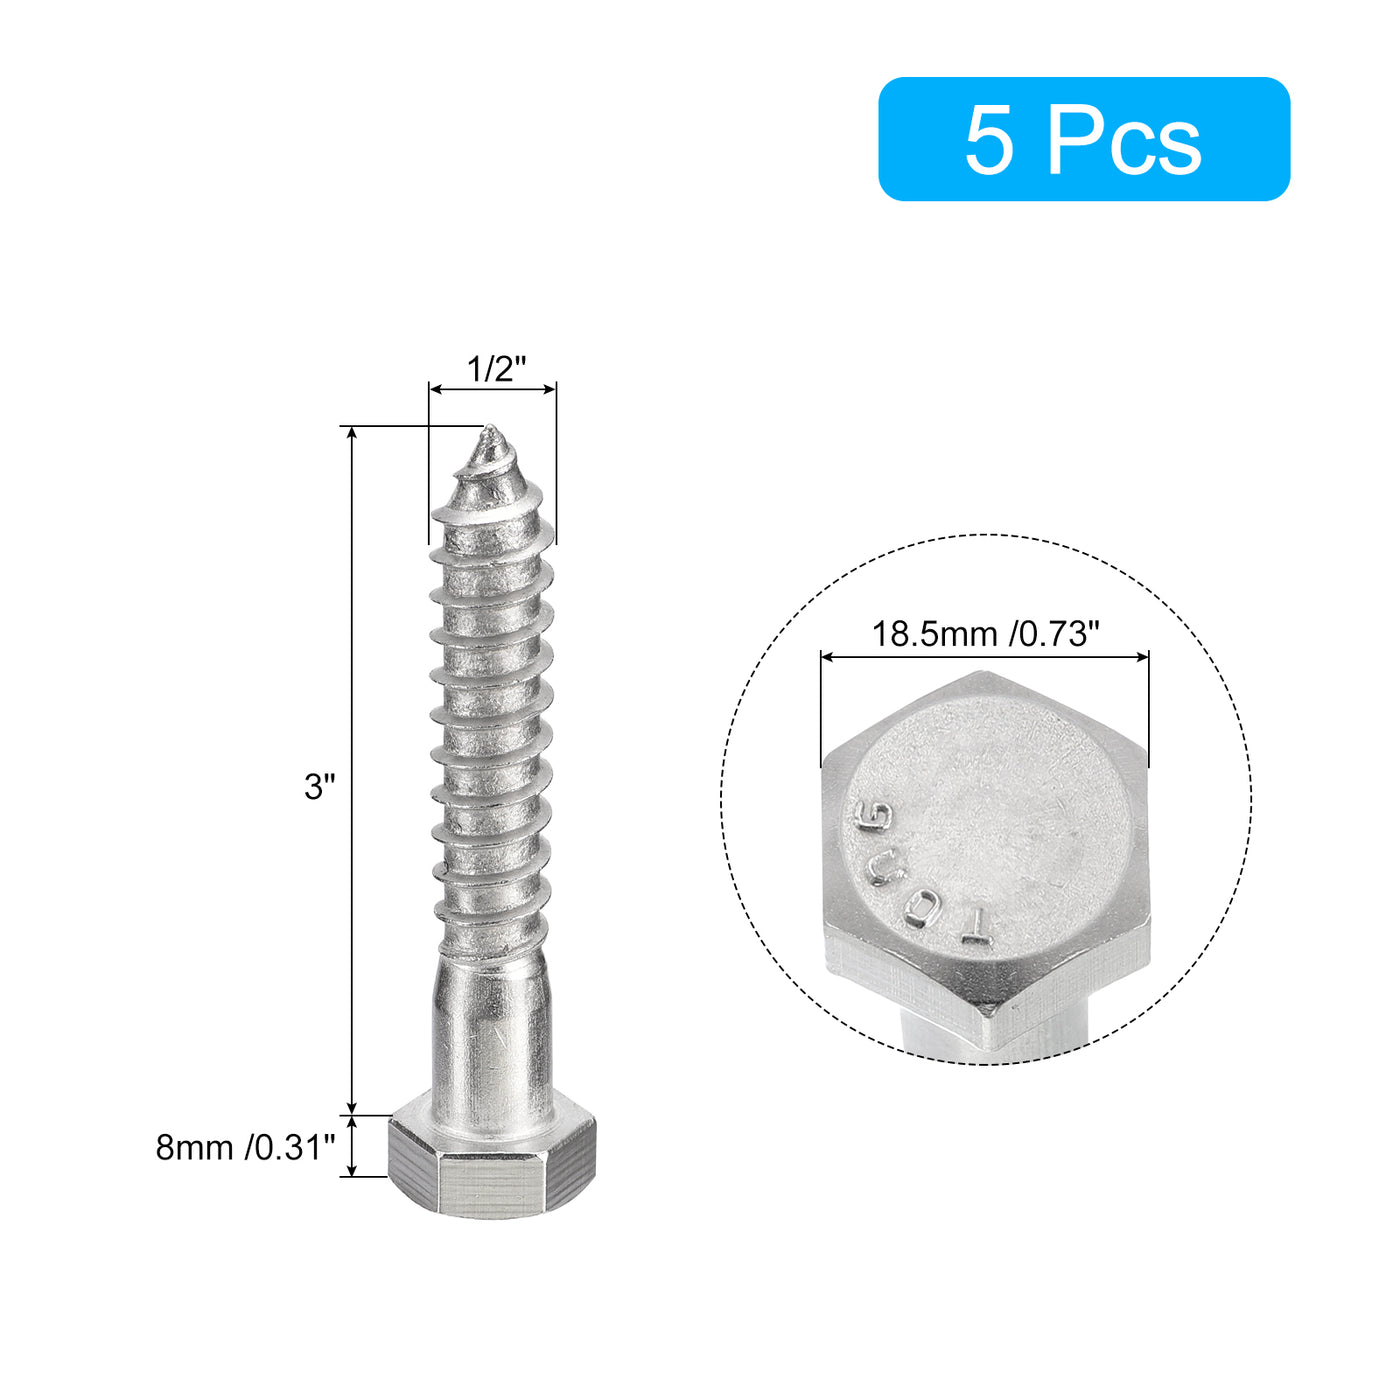 uxcell Uxcell Hex Head Lag Screws Bolts, 5pcs 1/2" x 3" 304 Stainless Steel Wood Screws